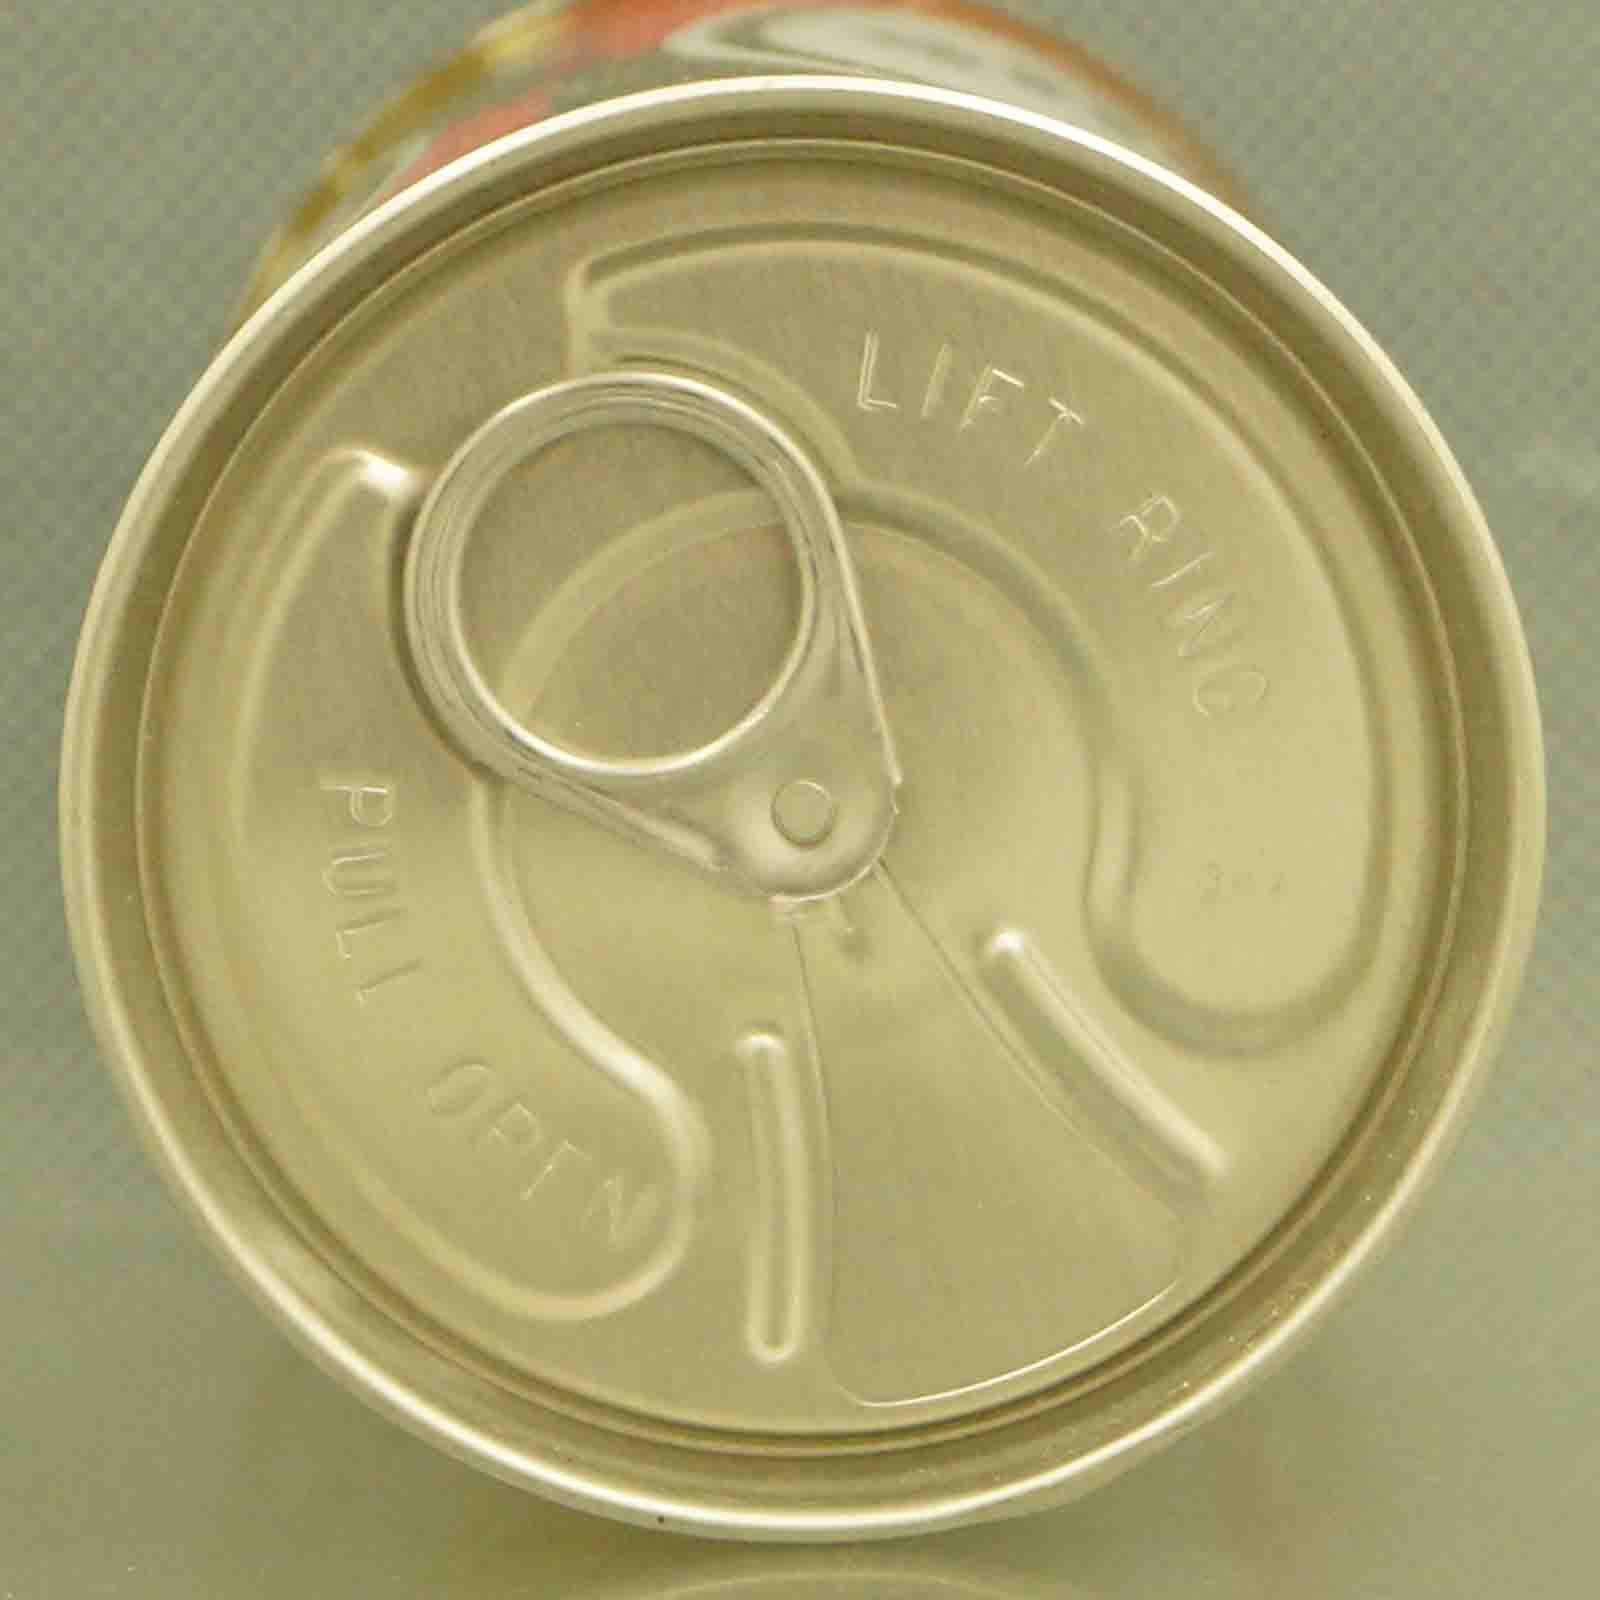 schmidts L122-19 pull tab beer can 5